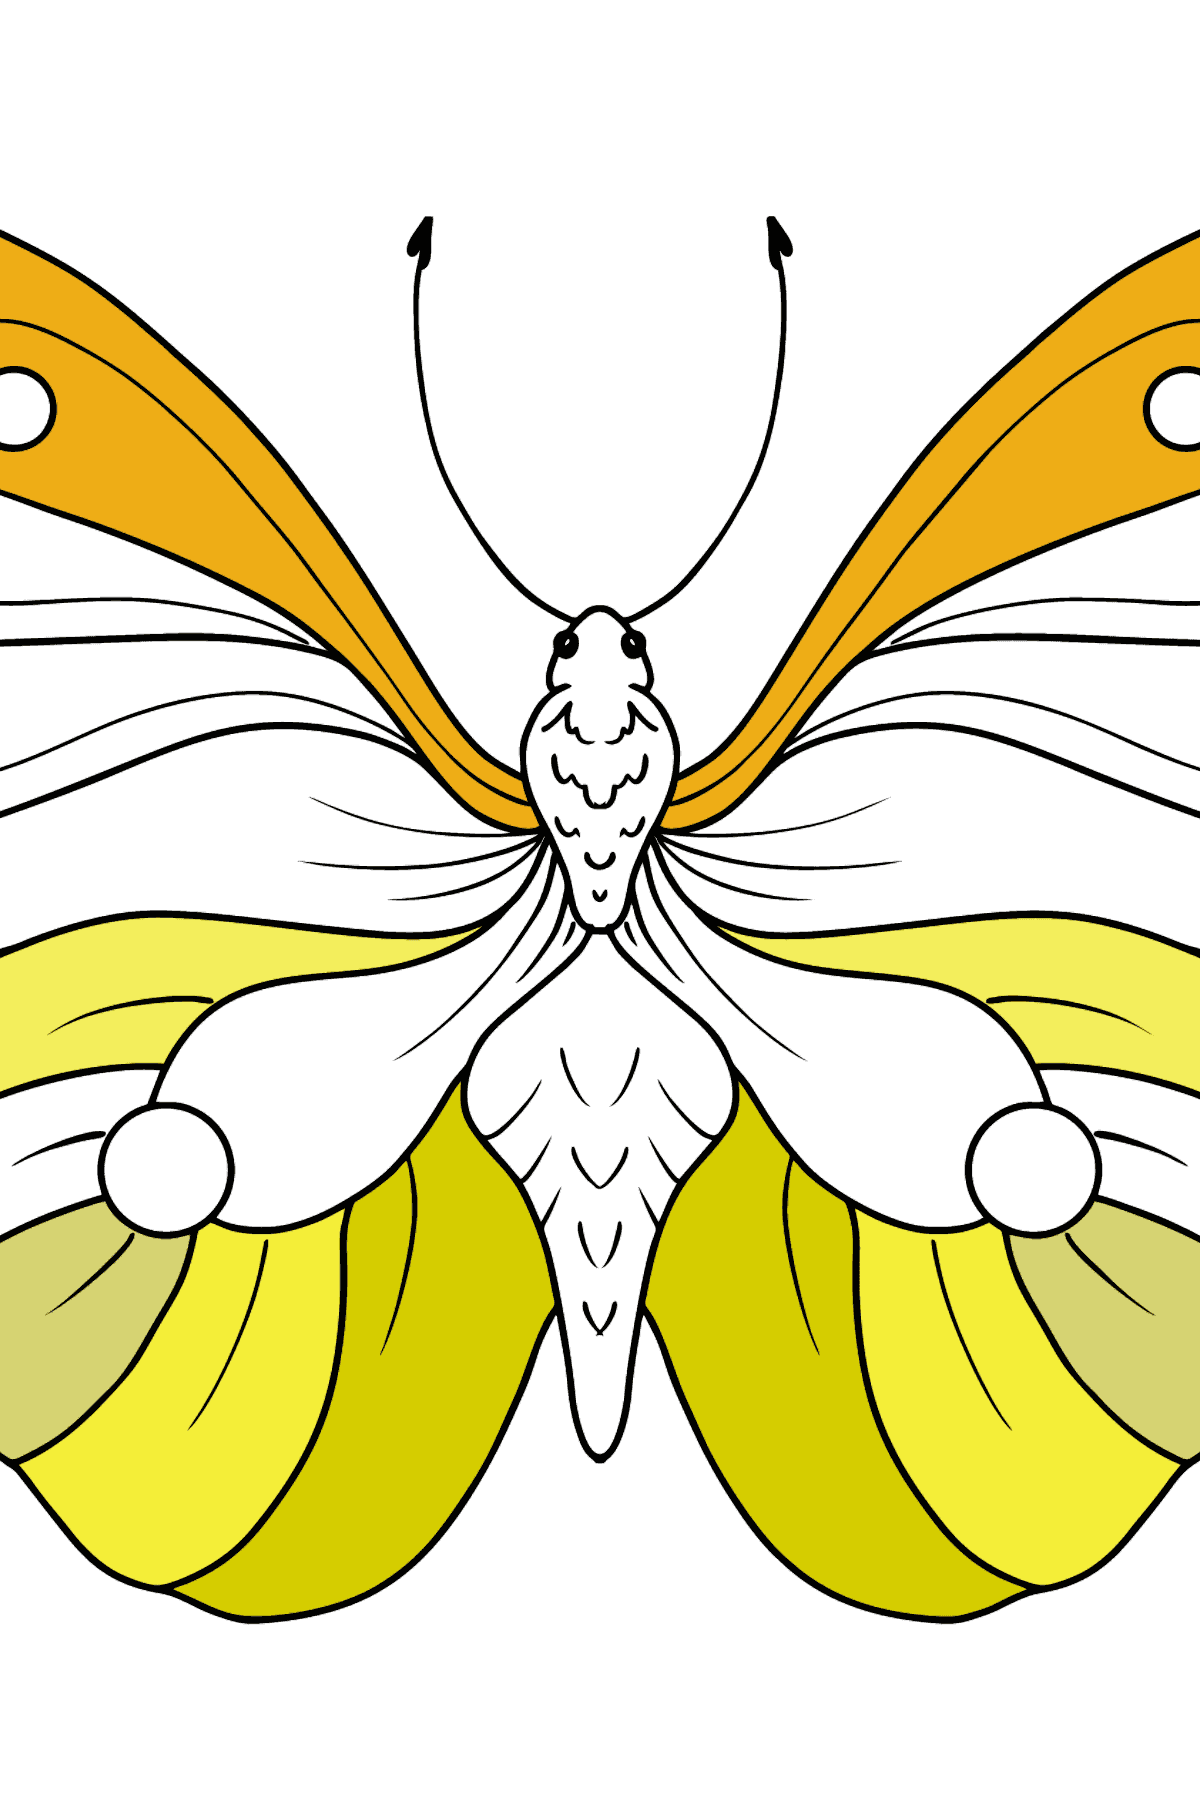 Lemongrass Butterfly coloring page - Coloring Pages for Kids